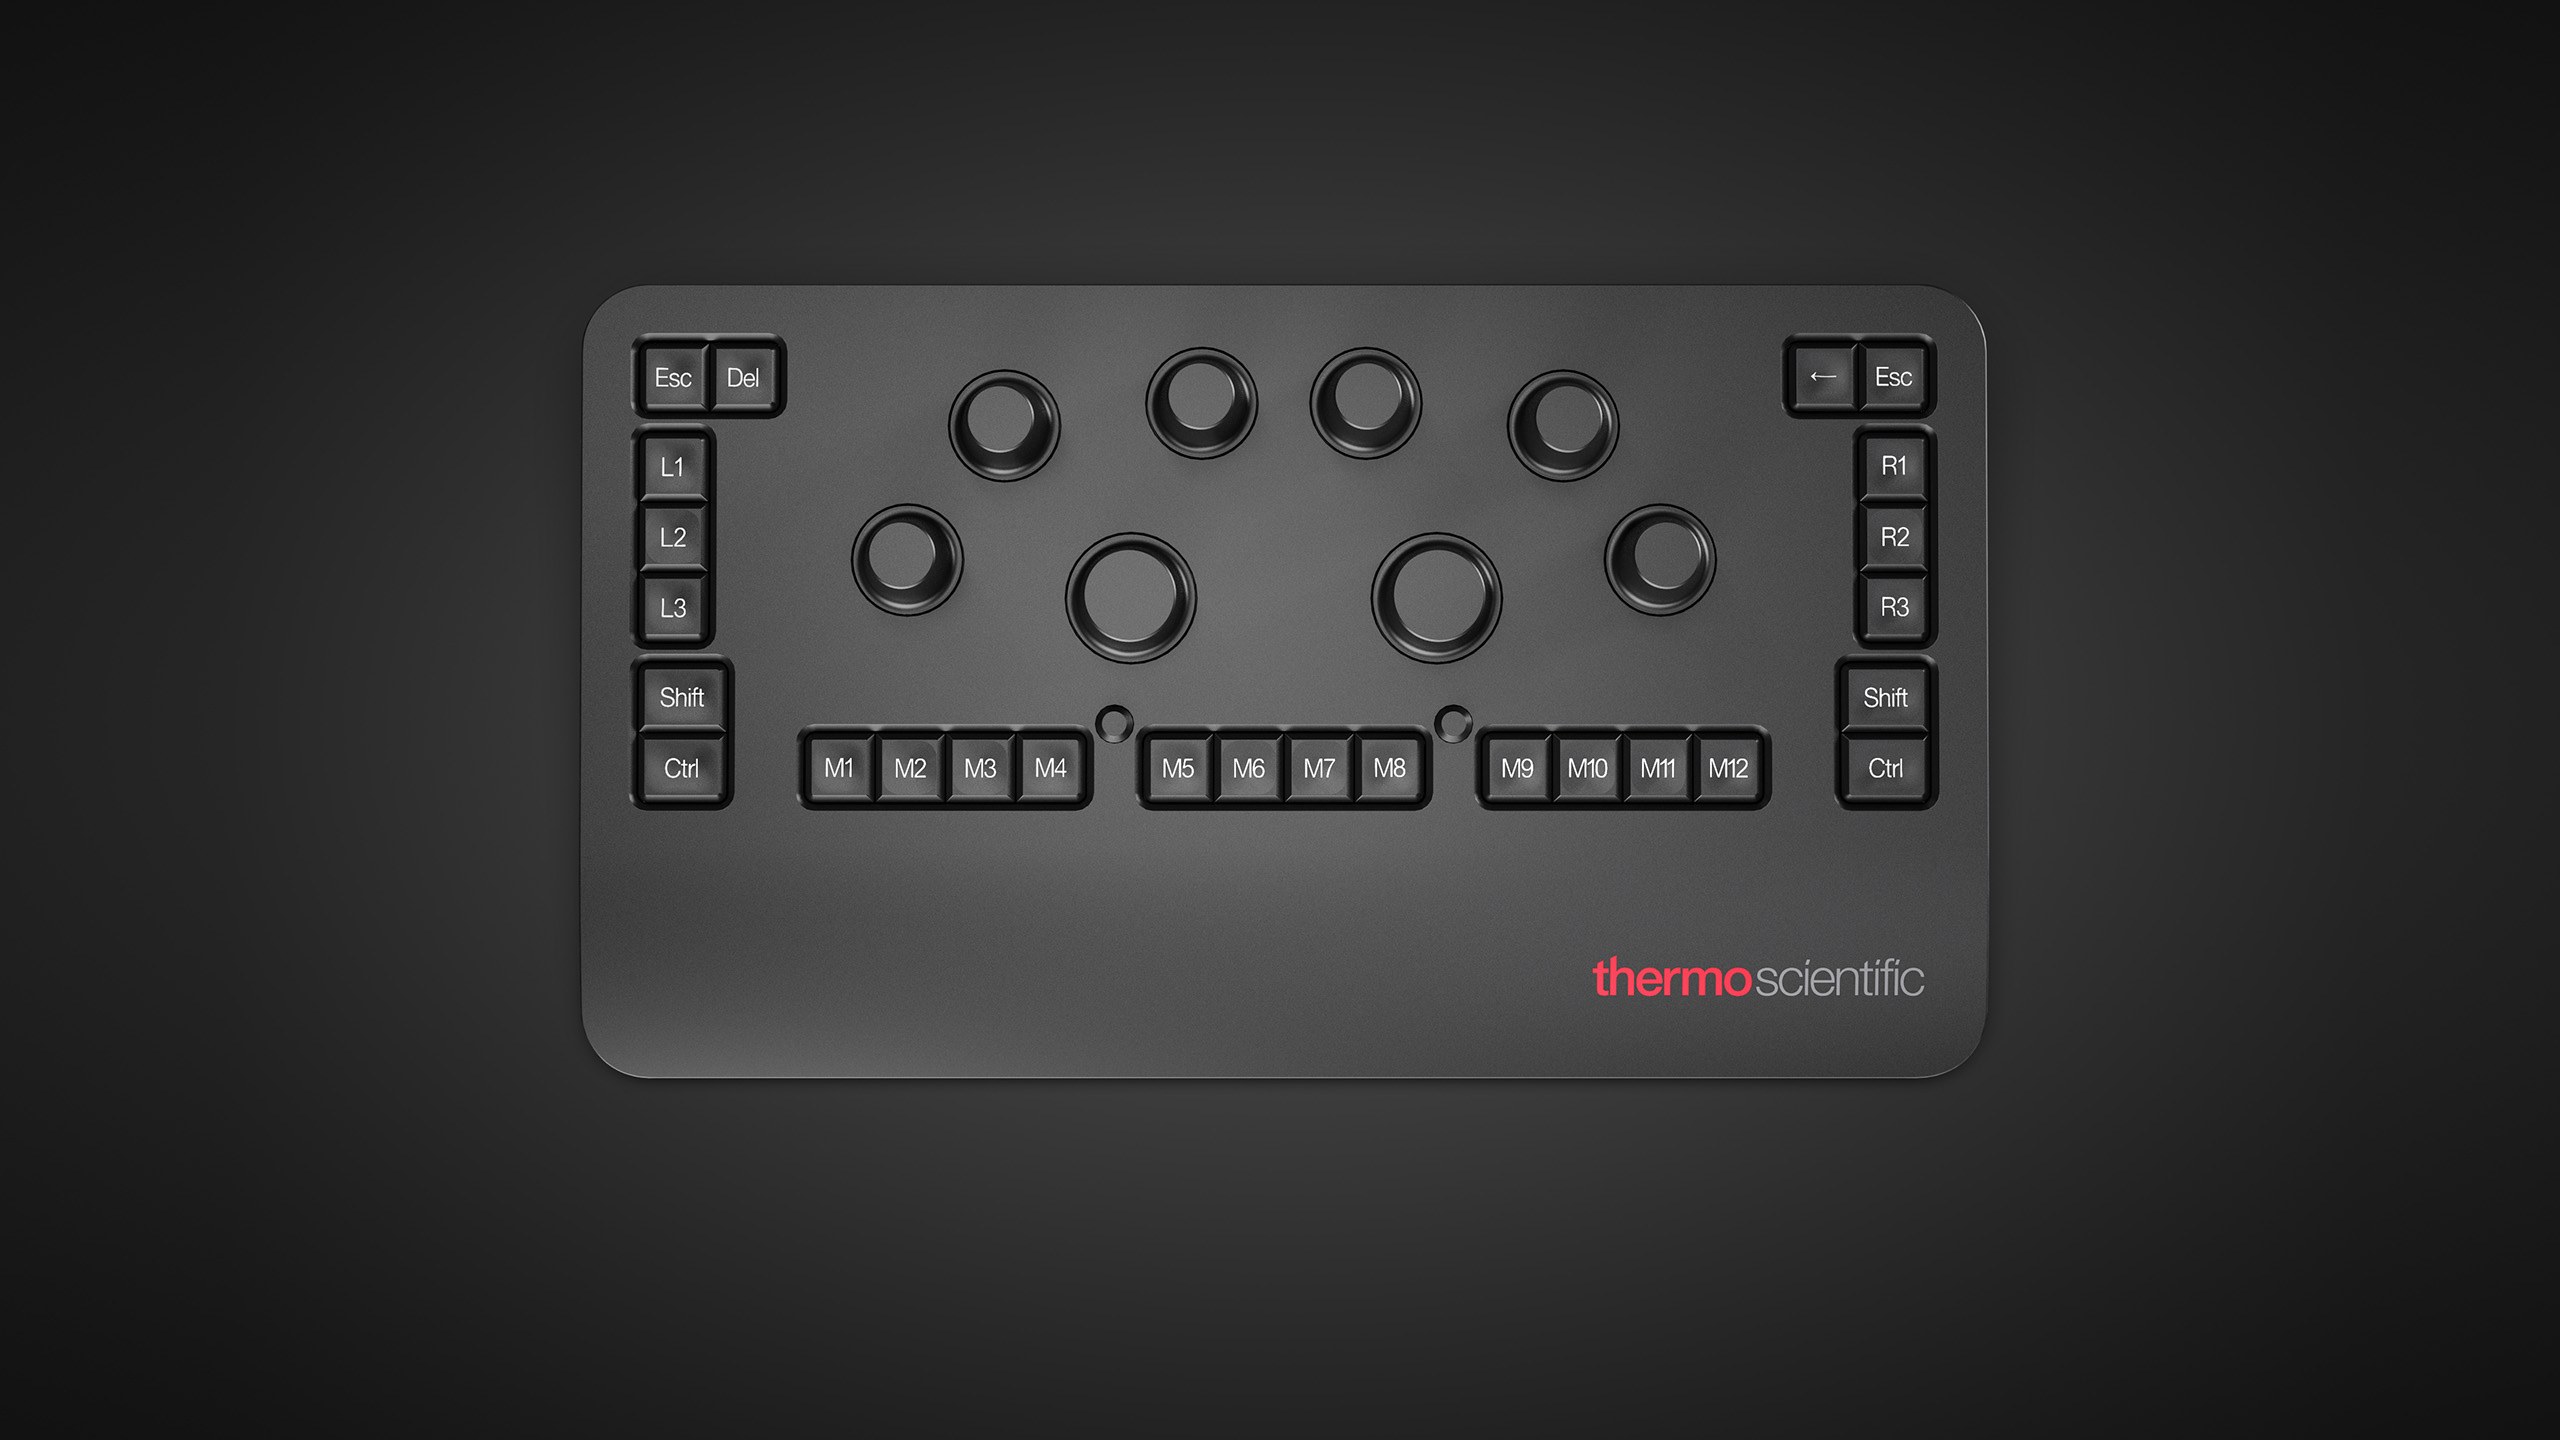 thermo scientific keyboard top